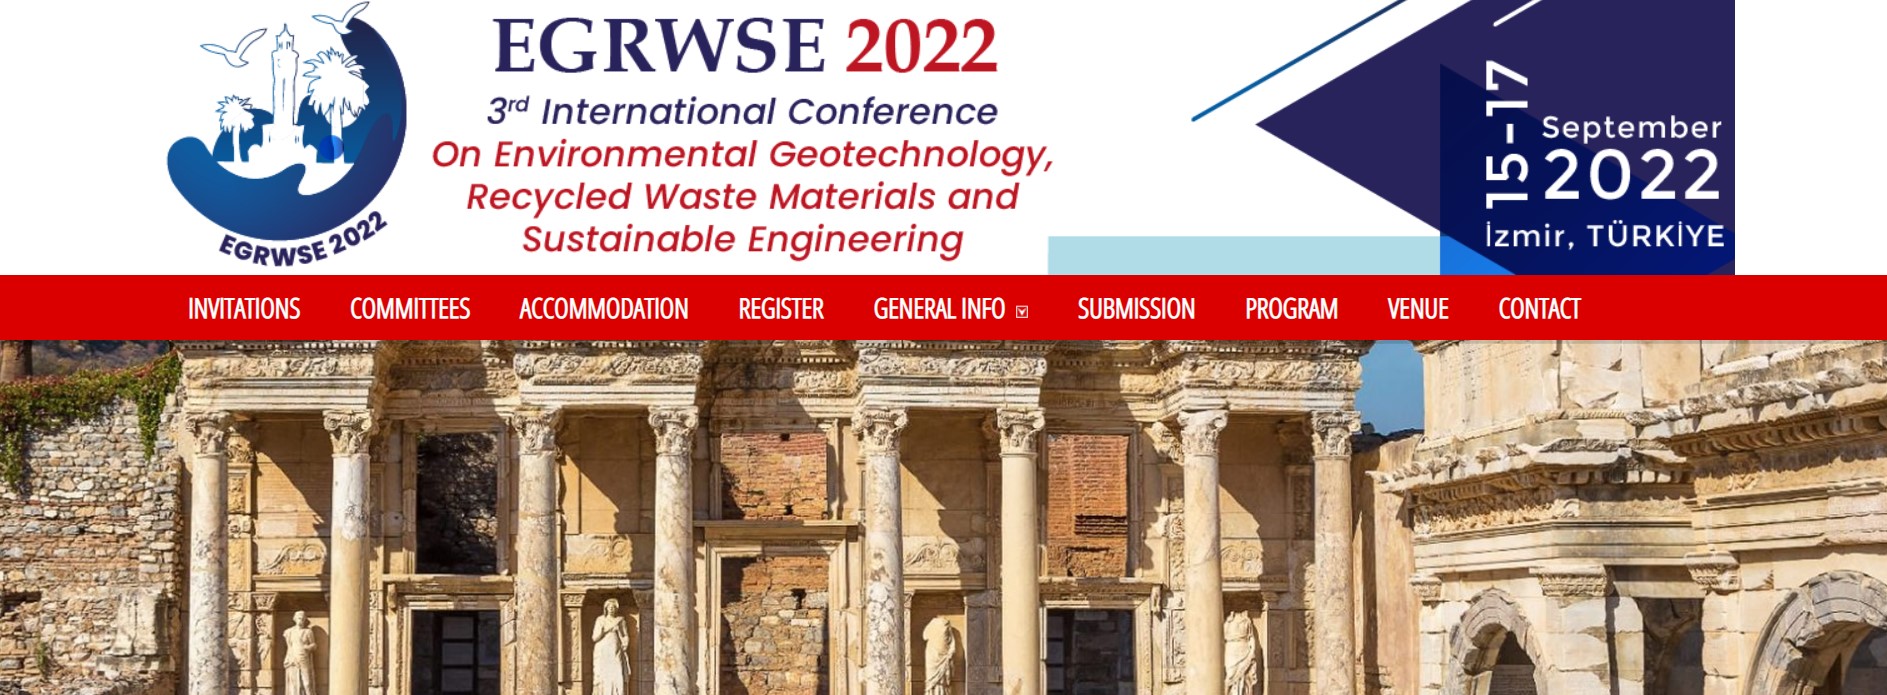 3. International Conference on Environmental Geotechnology, Recycled Waste Materials and Sustainable Engineering, EGRWSE-2022